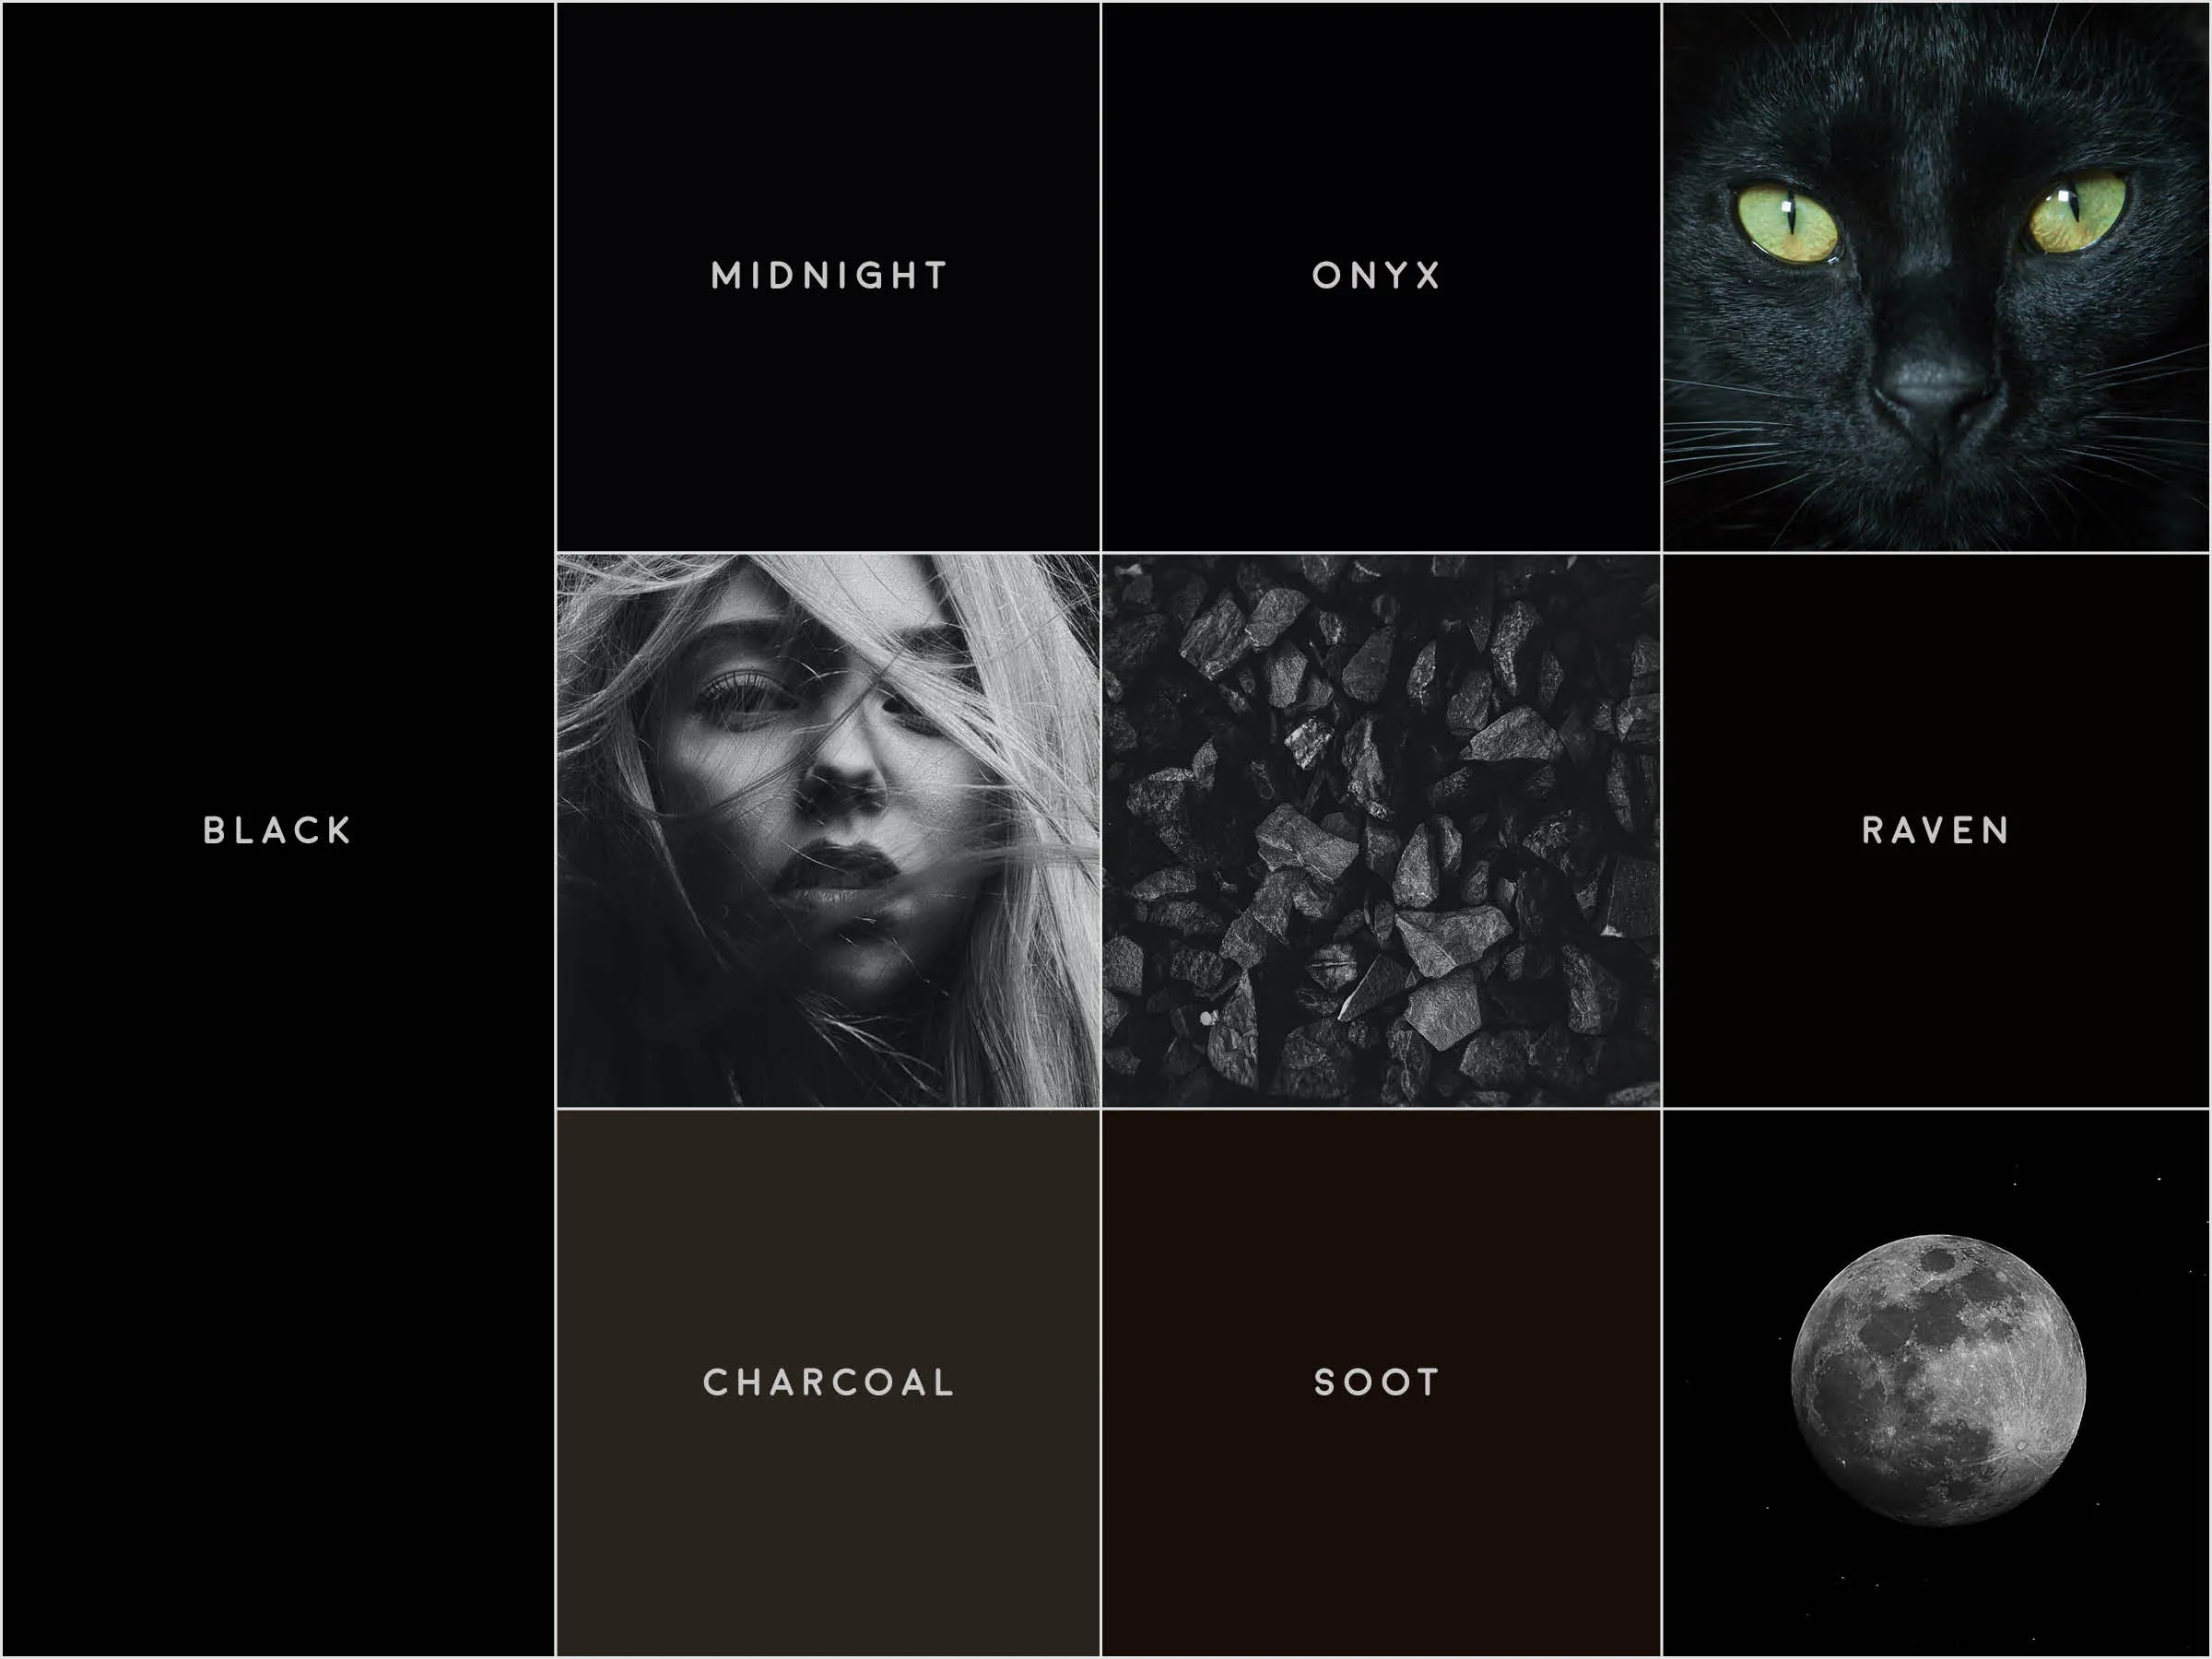 A gridded image with various tones of black, and small photographs of a cat, a black and white female portrait, coal, and the moon